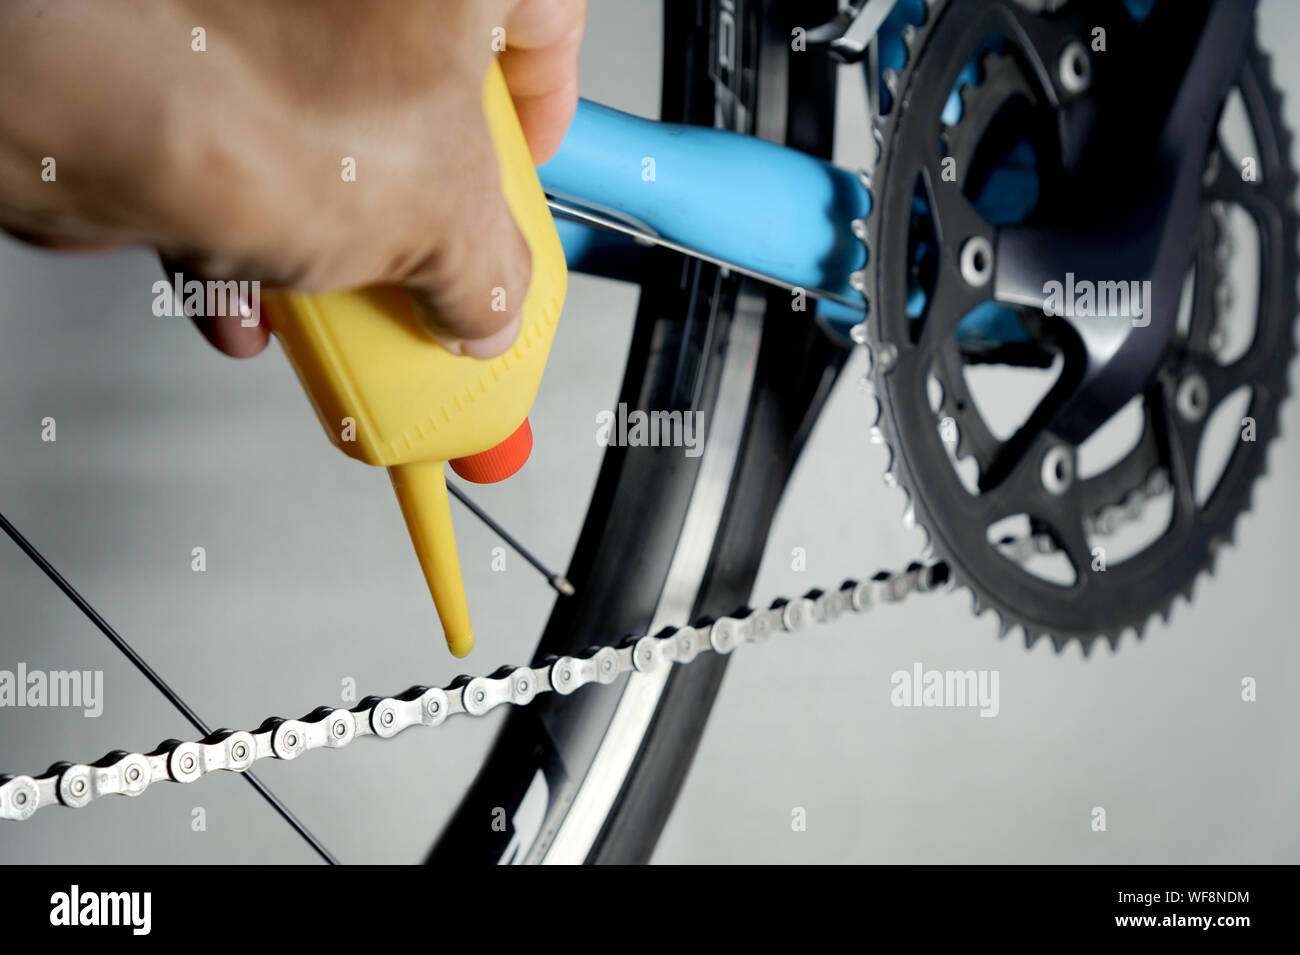 Mechanic oiling bicycle chain and gear with oil. Studio shot Stock Photo